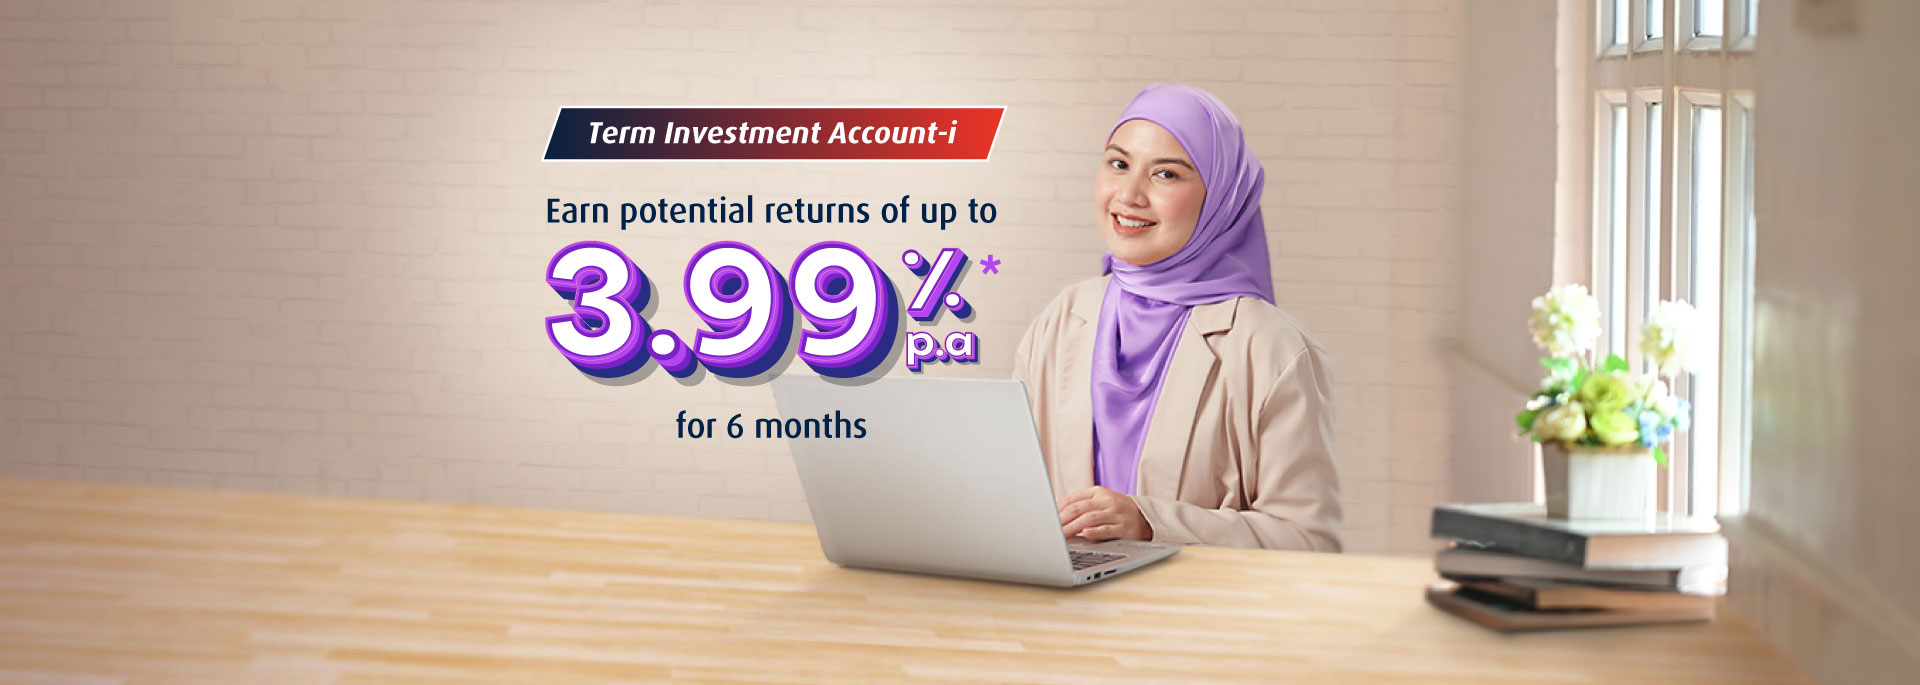 earn potential returns of up to 3.99%p.a for 6 months